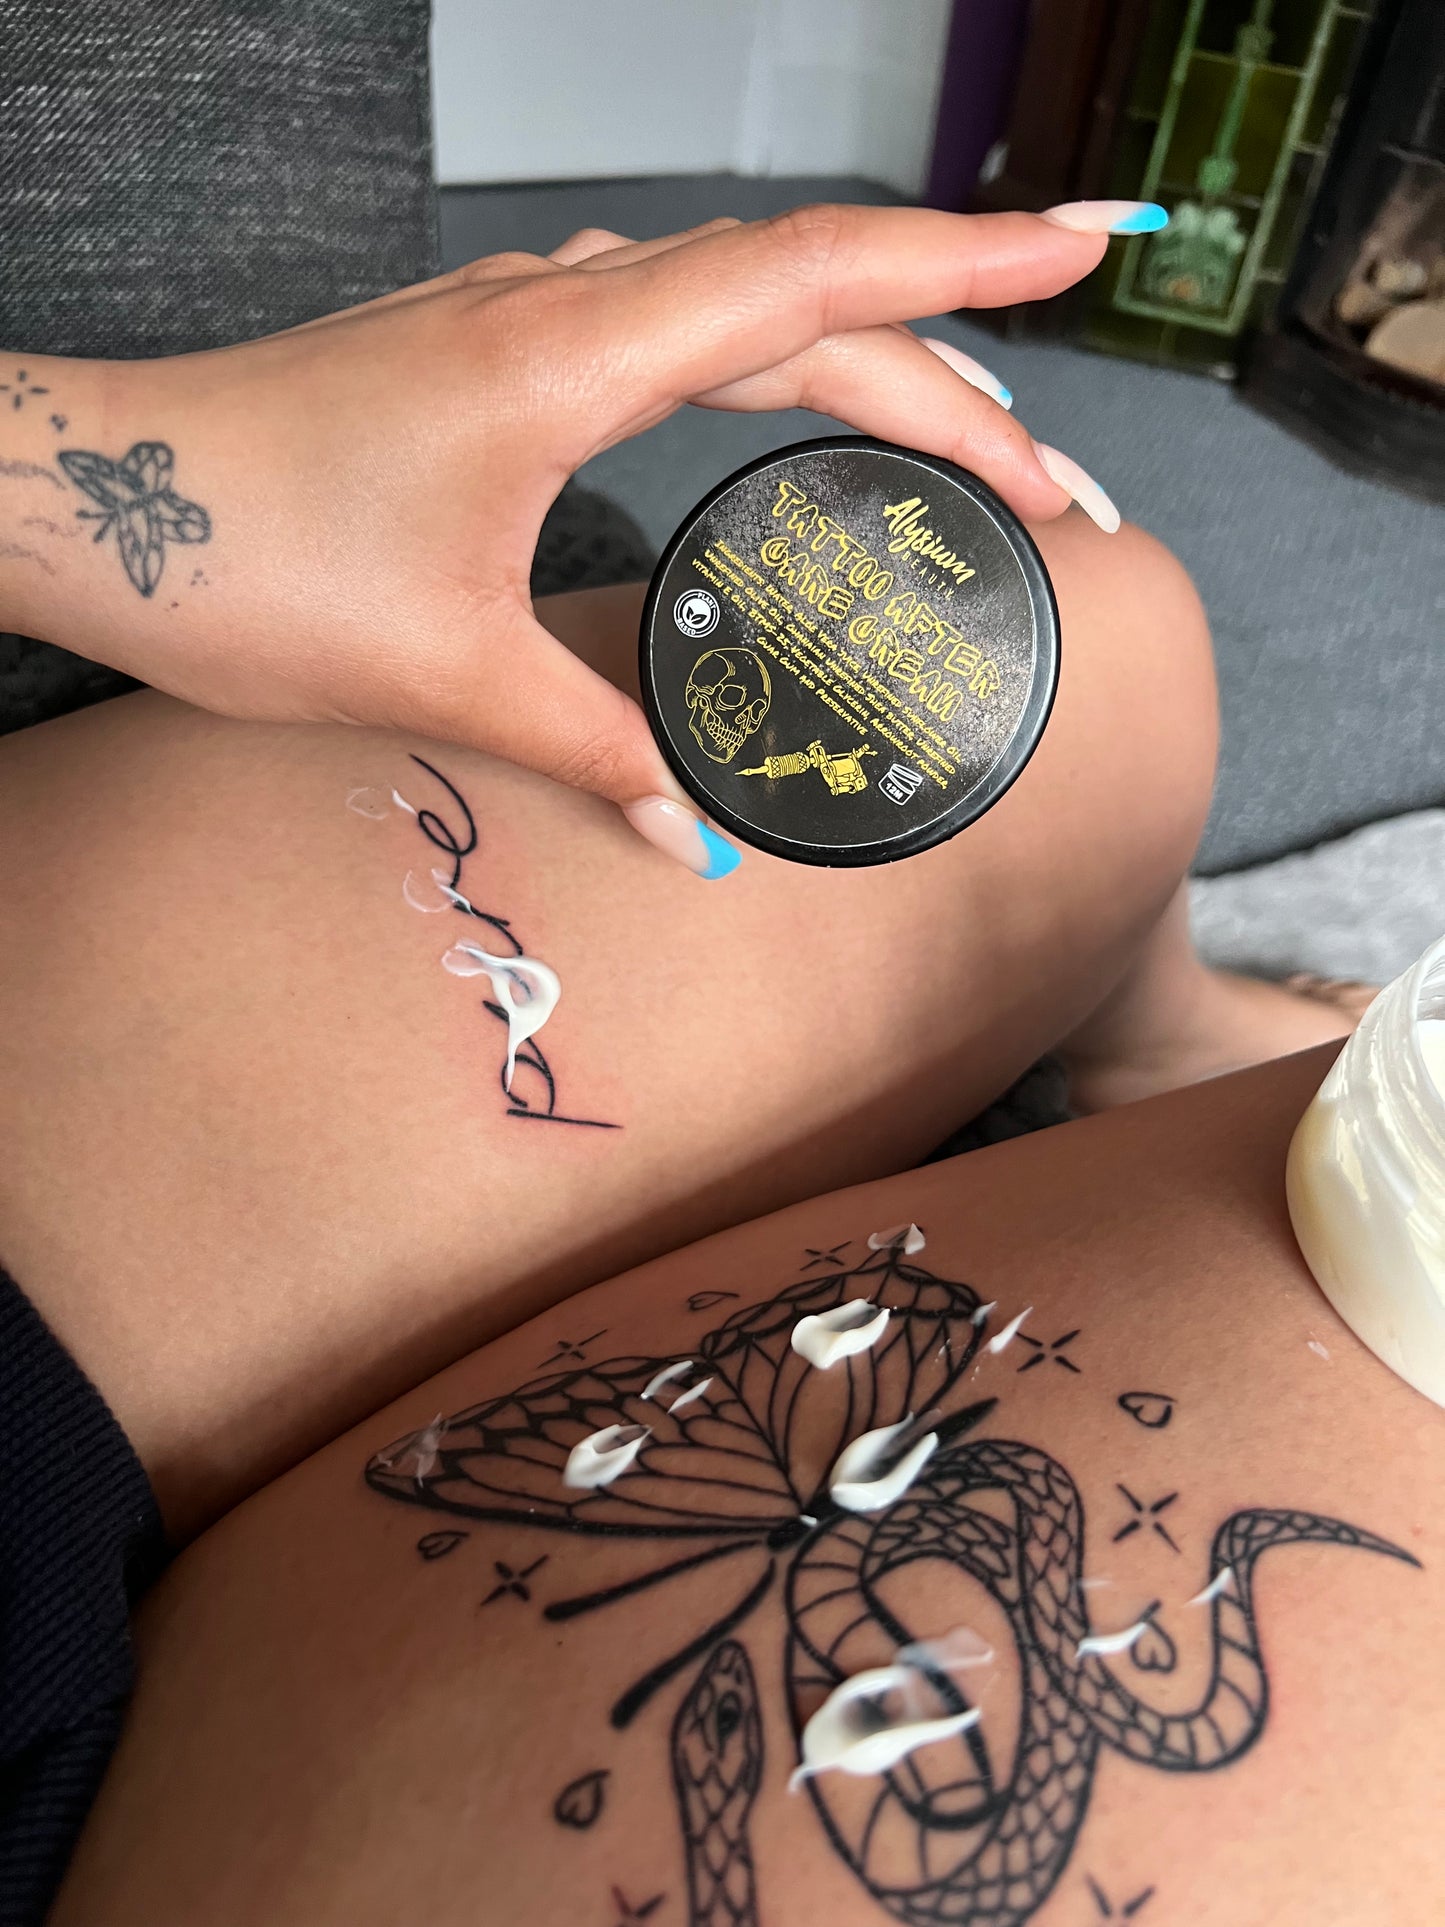 Plant Based Tattoo After Care Cream